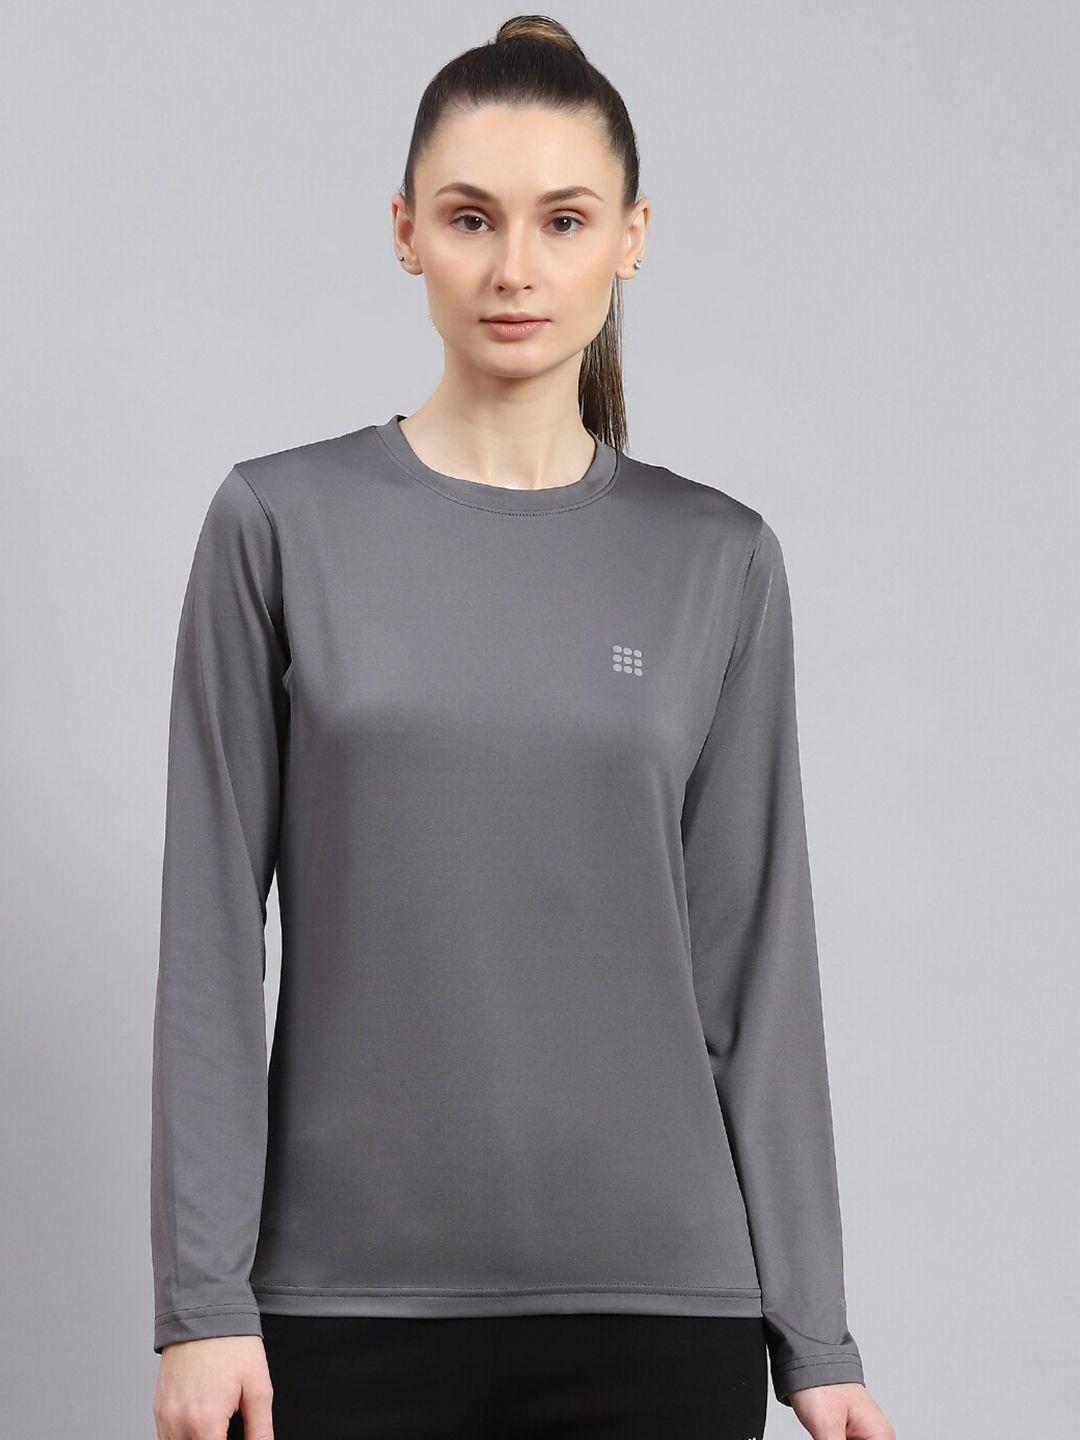 rock.it-round-neck-long-sleeves-sports-t-shirt